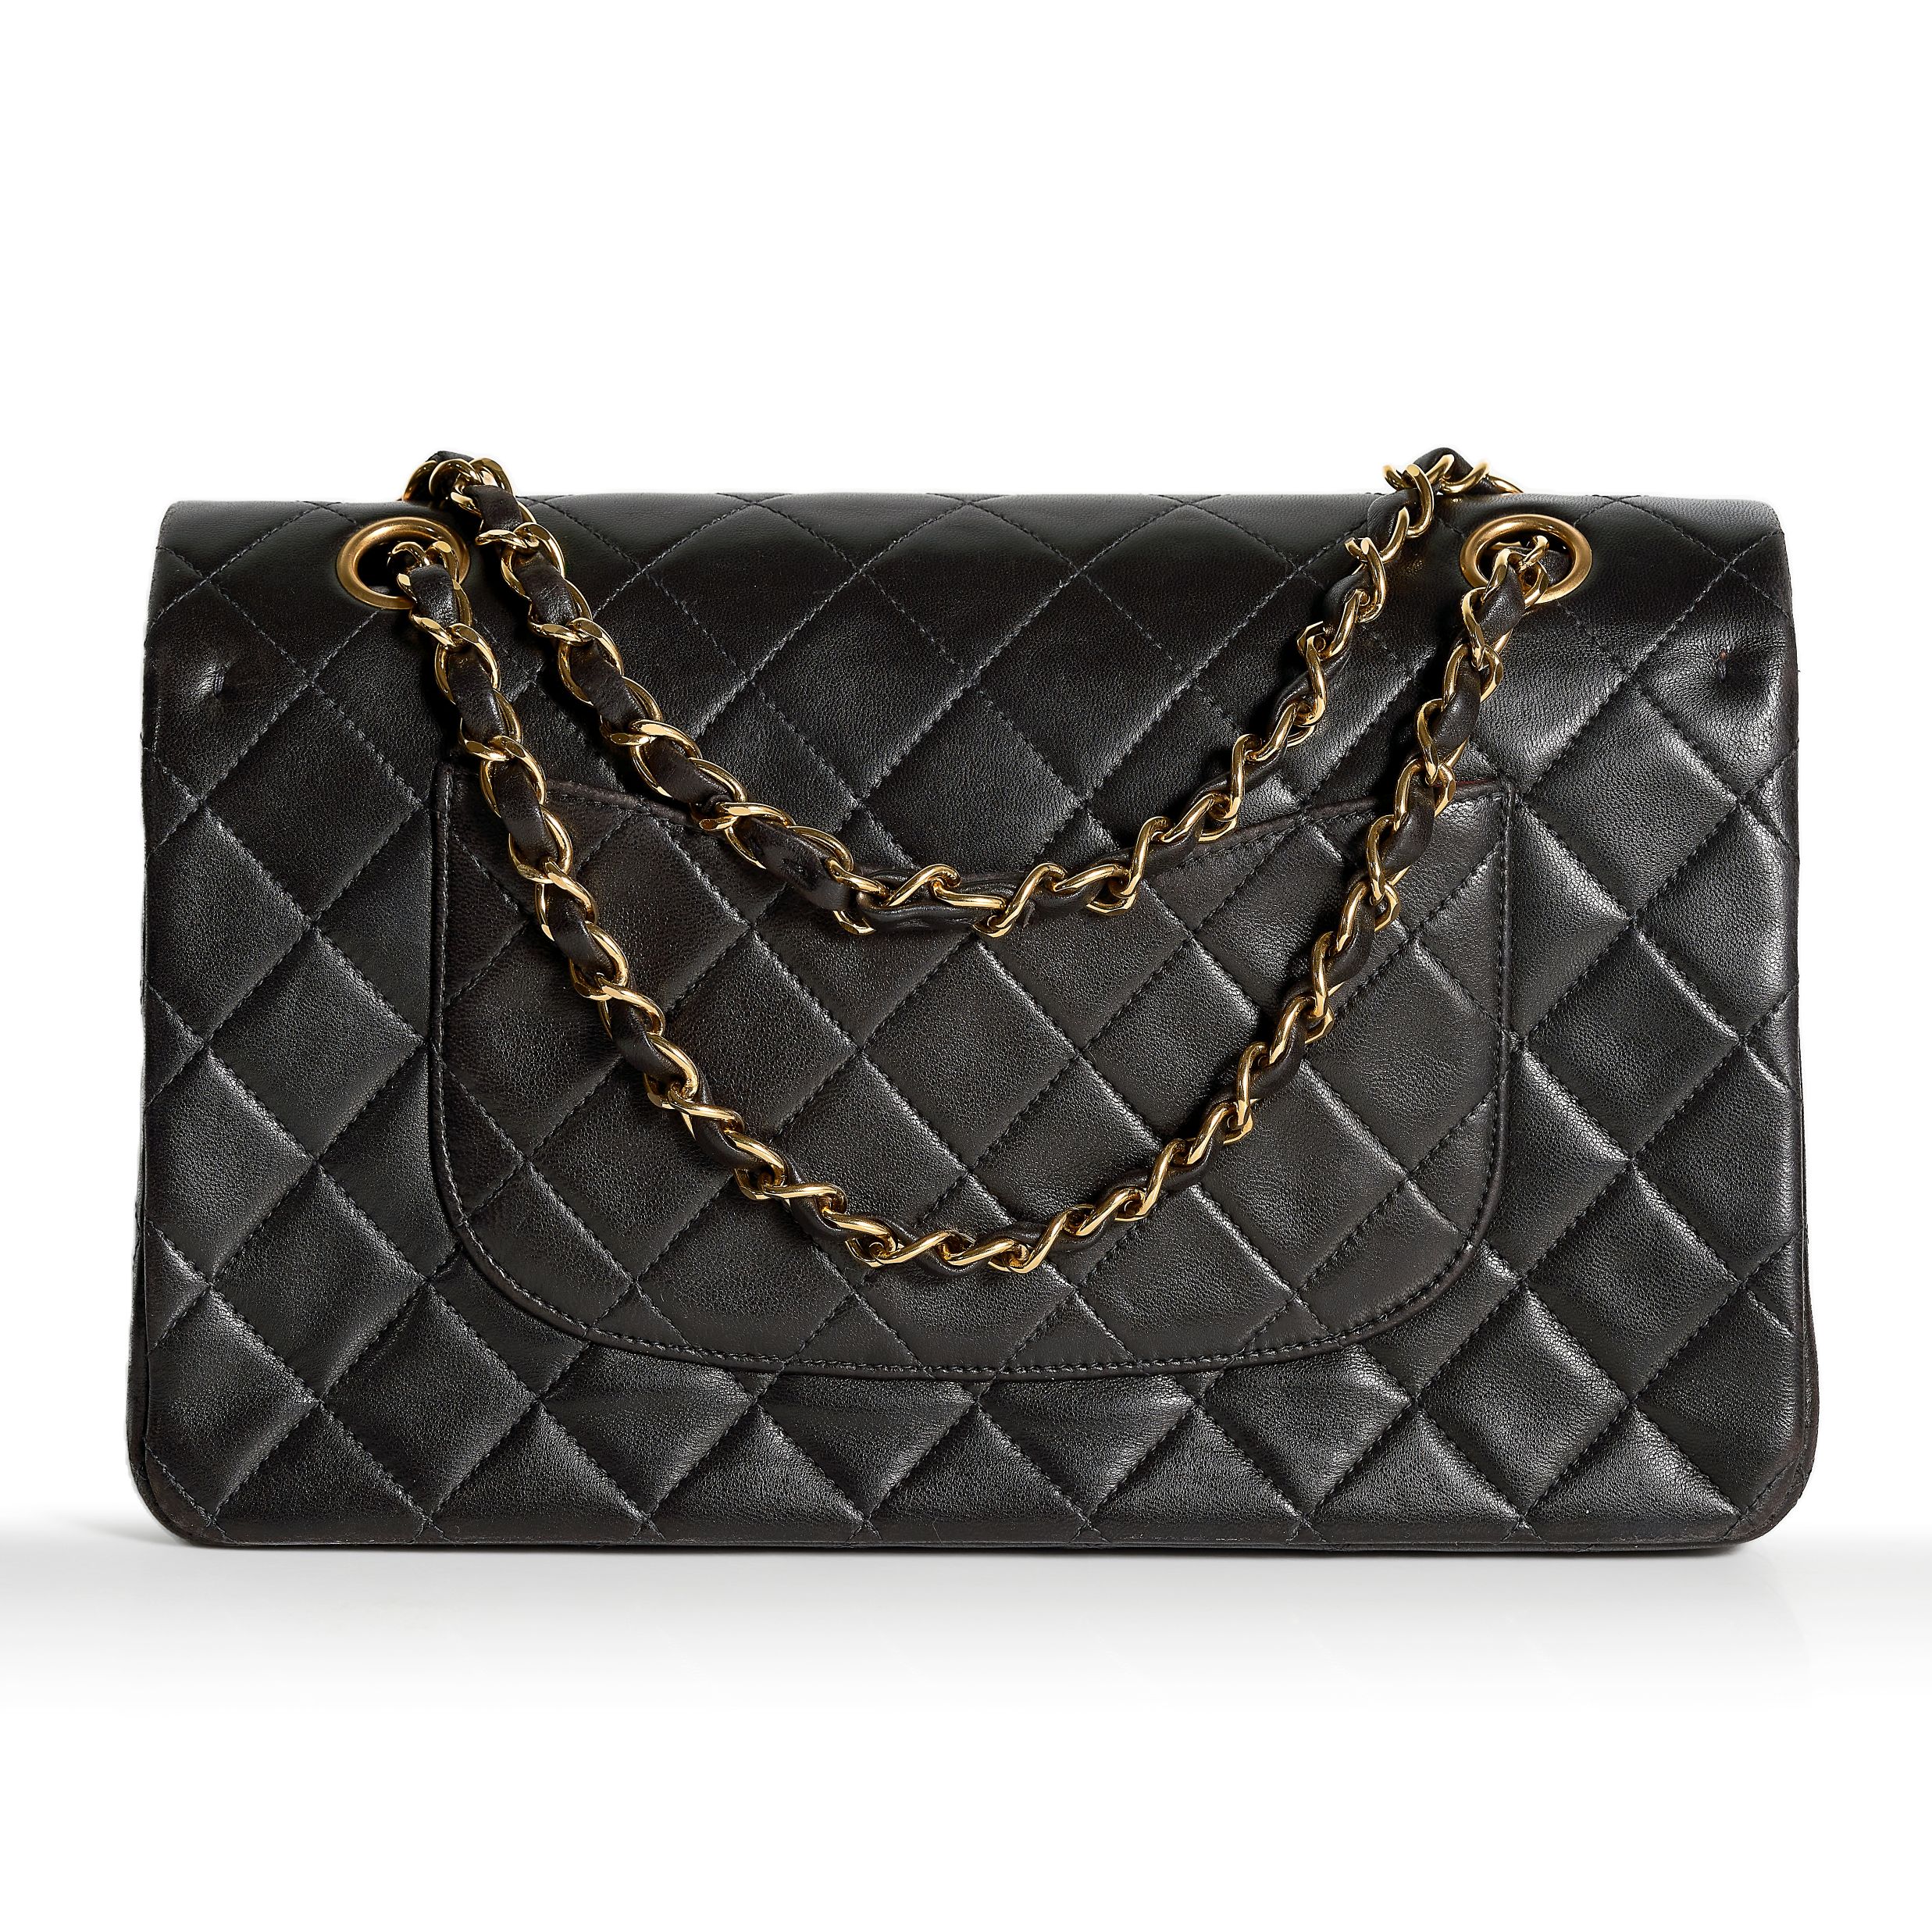 CHANEL, A VINTAGE BLACK QUILTED LAMB LEATHER 10" DOUBLE FLAP BAG quilted lamb leather, gold tone - Image 2 of 3